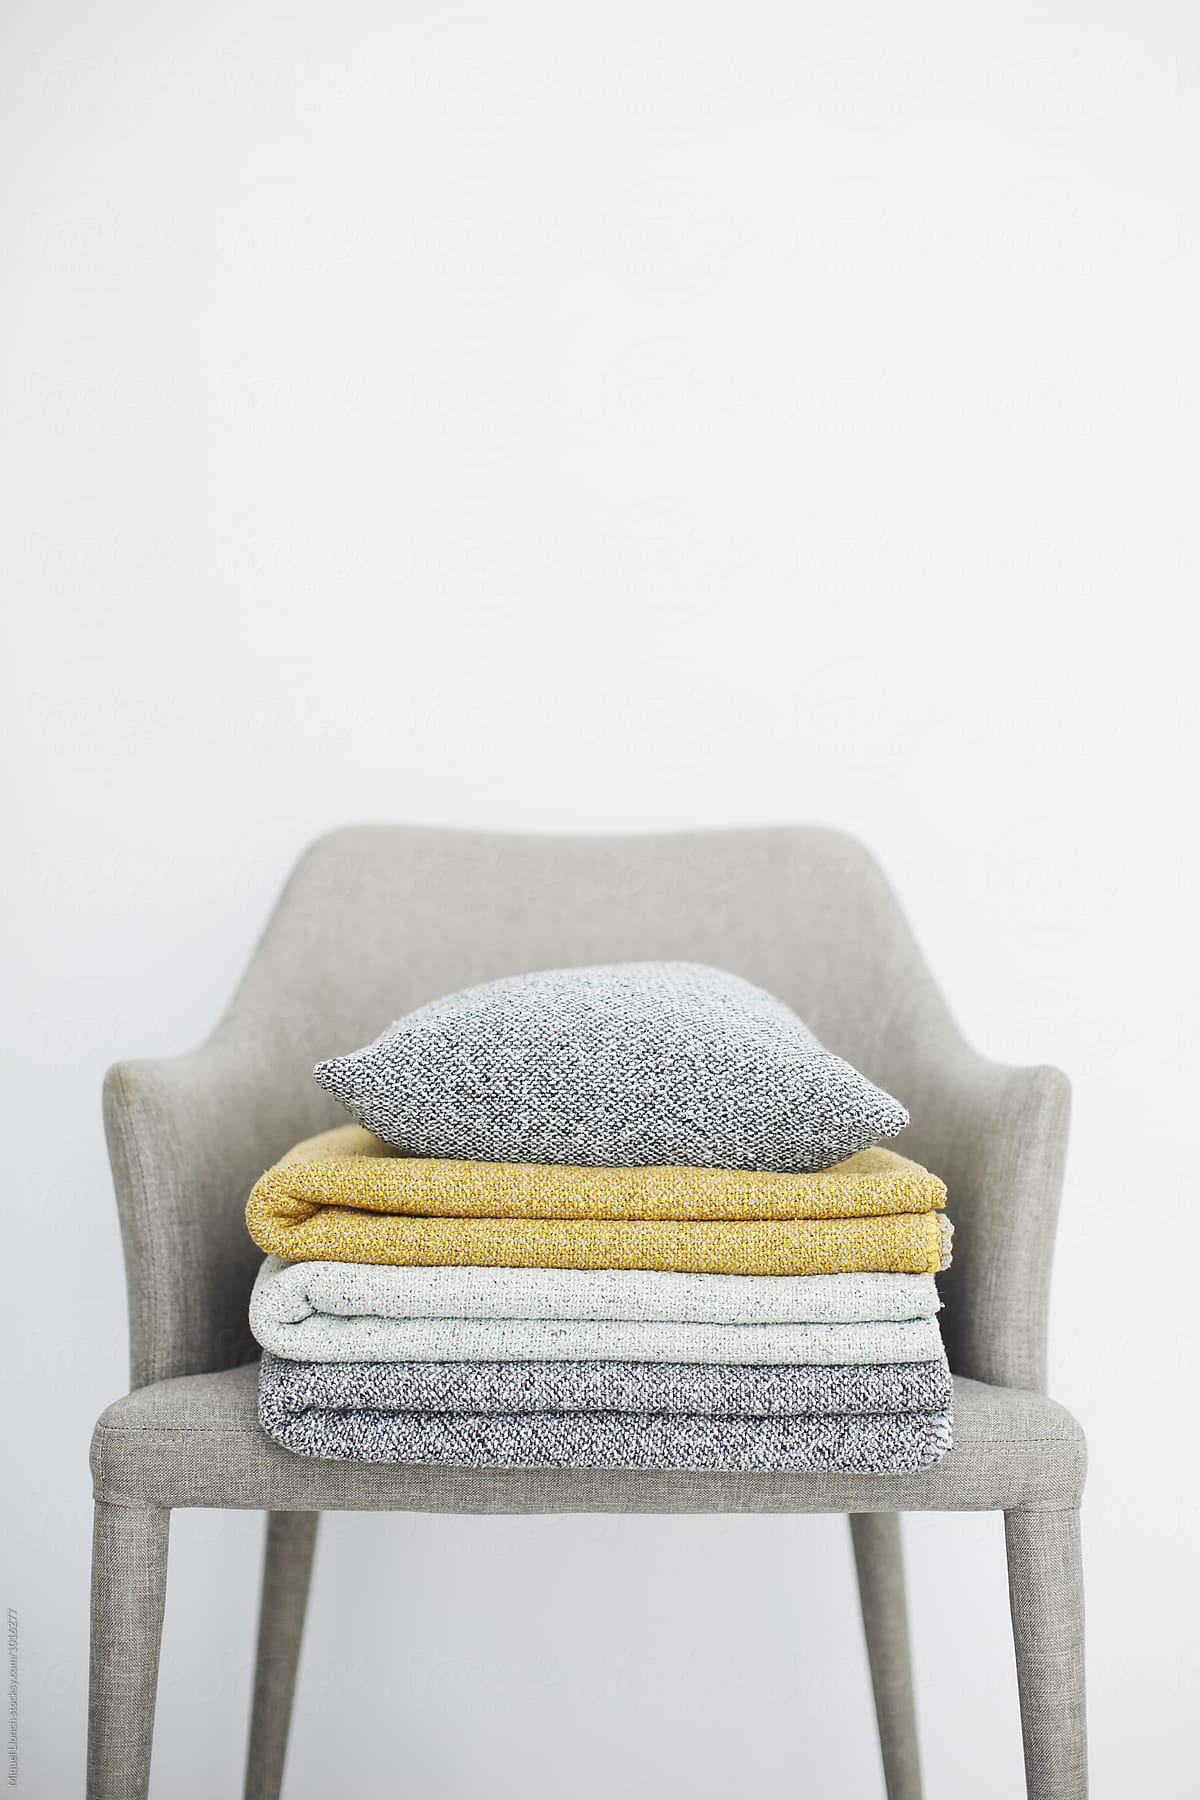 Set of folded blankets and pillow on a chair